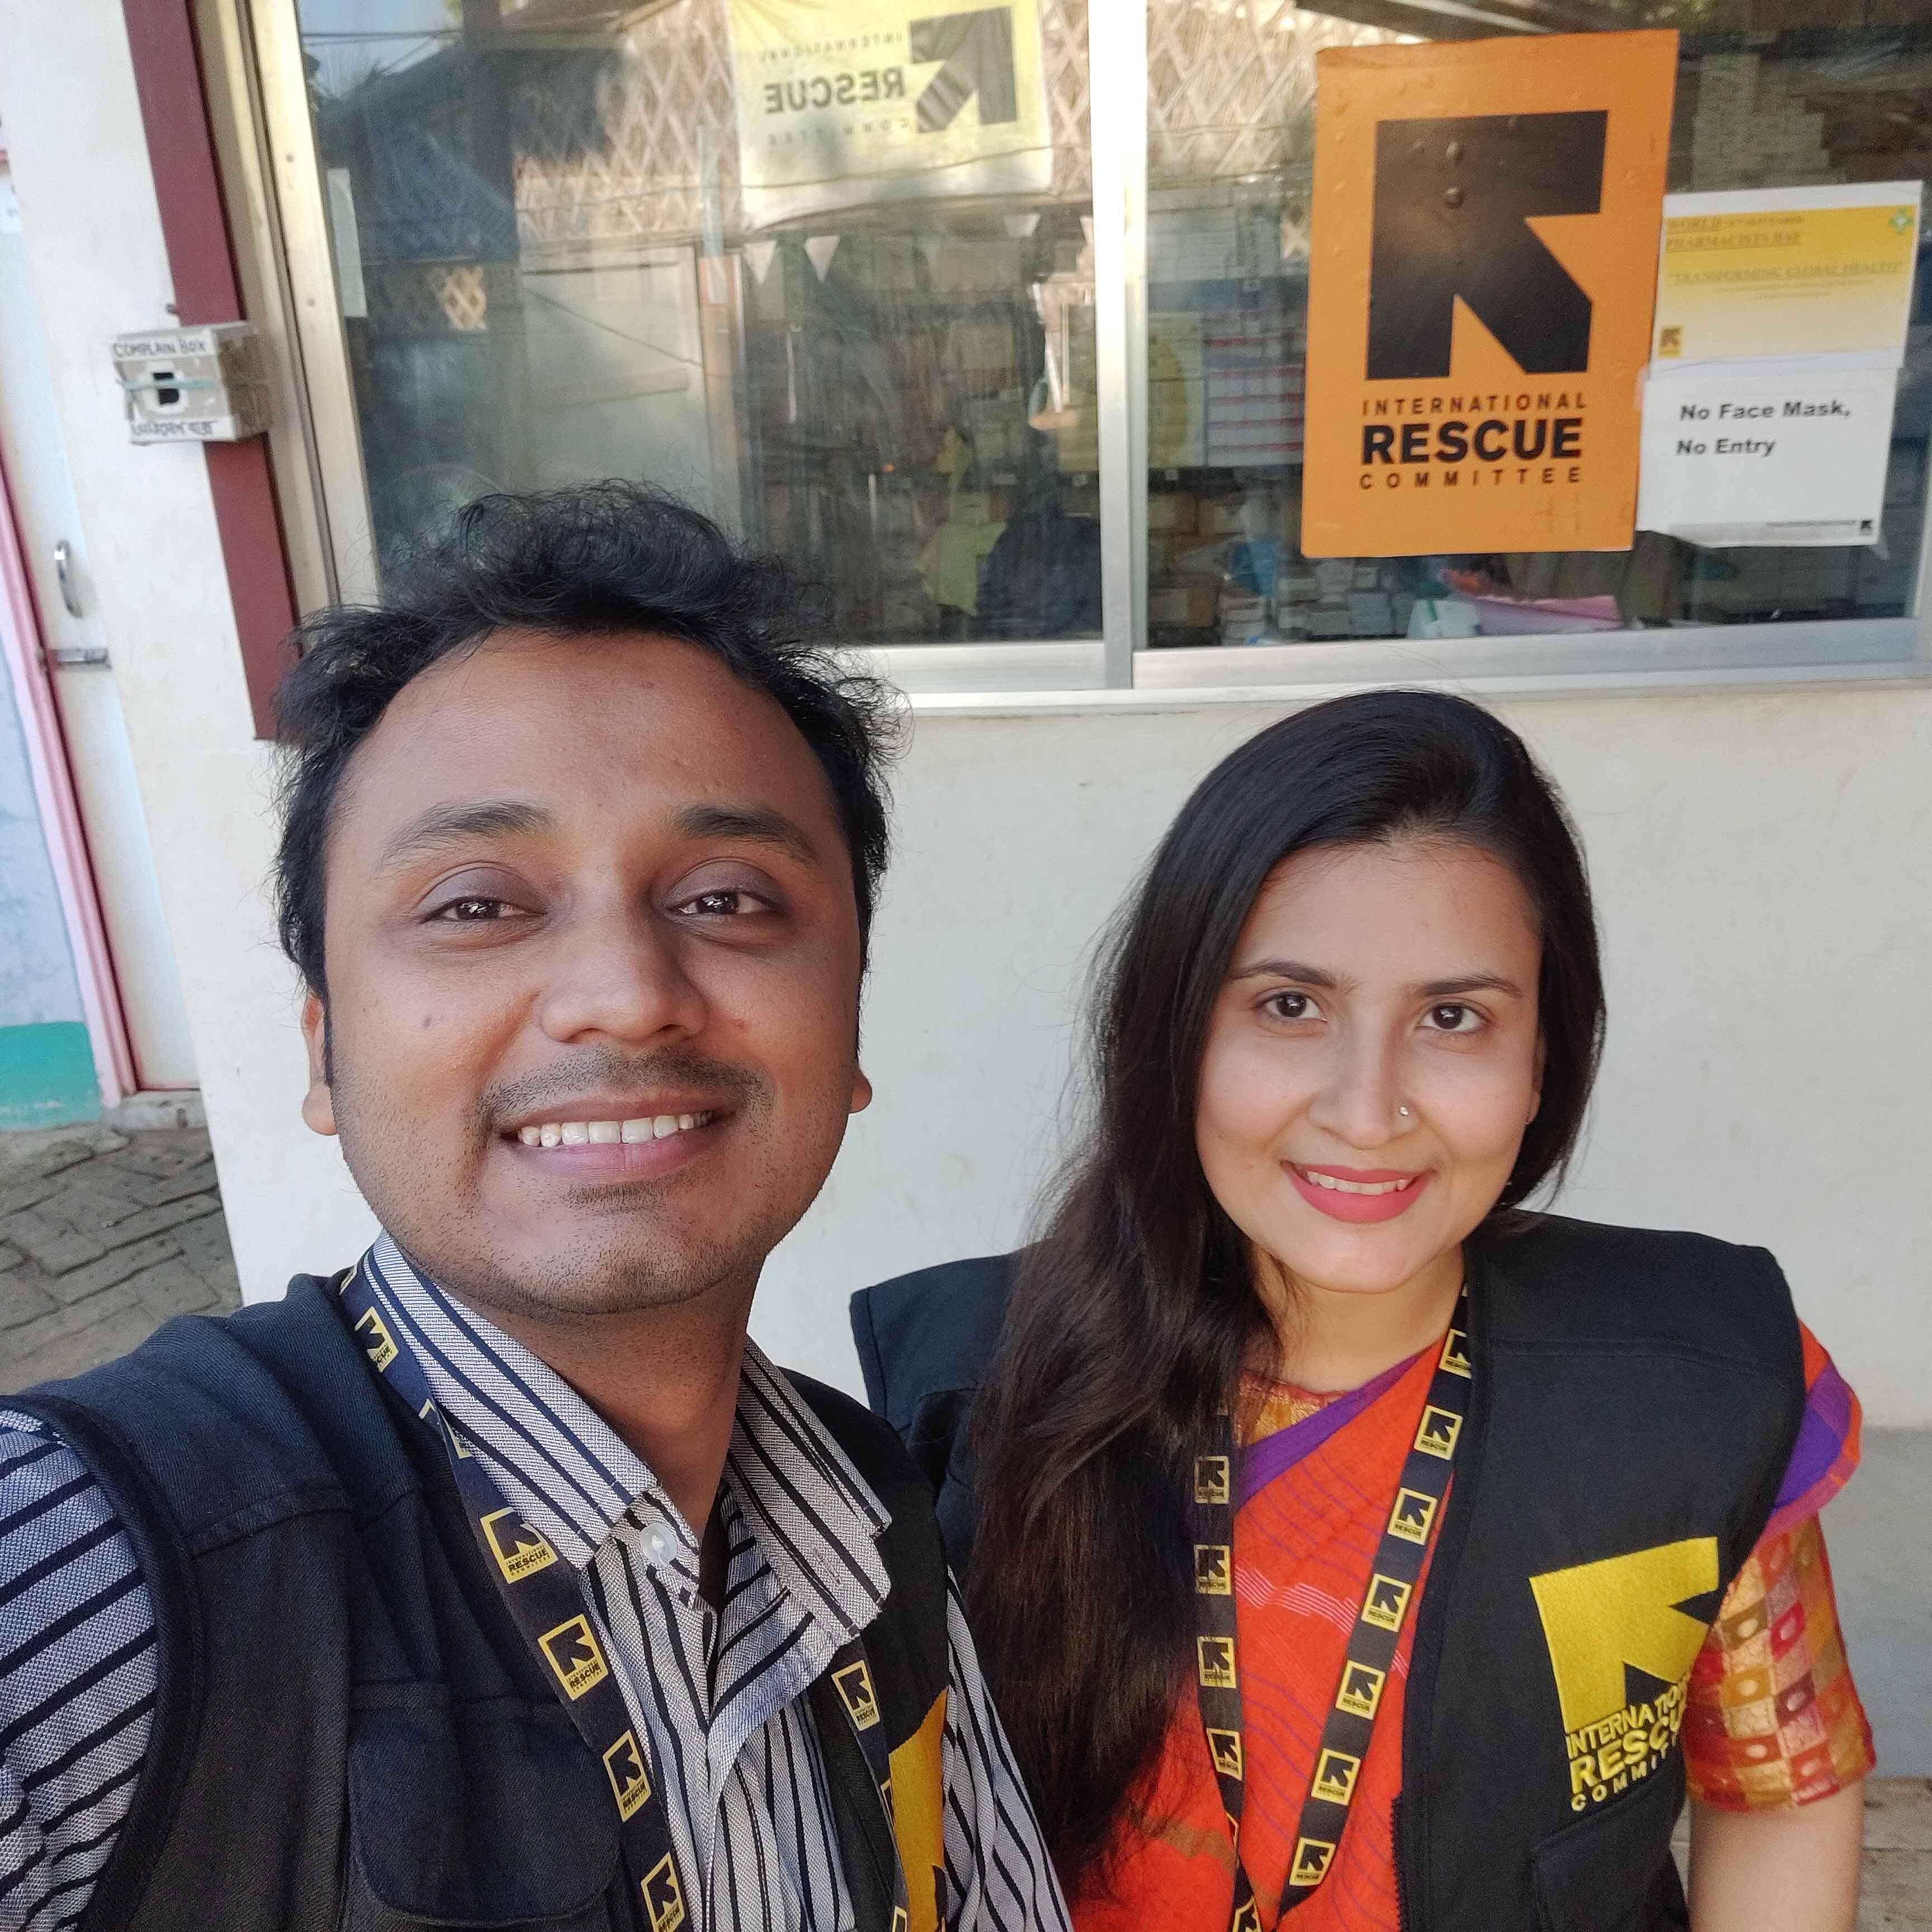 Selfie of Dr Muminul Haque Munna and Dr Ramima Afrin Pinky who work for the IRC in Bangladesh